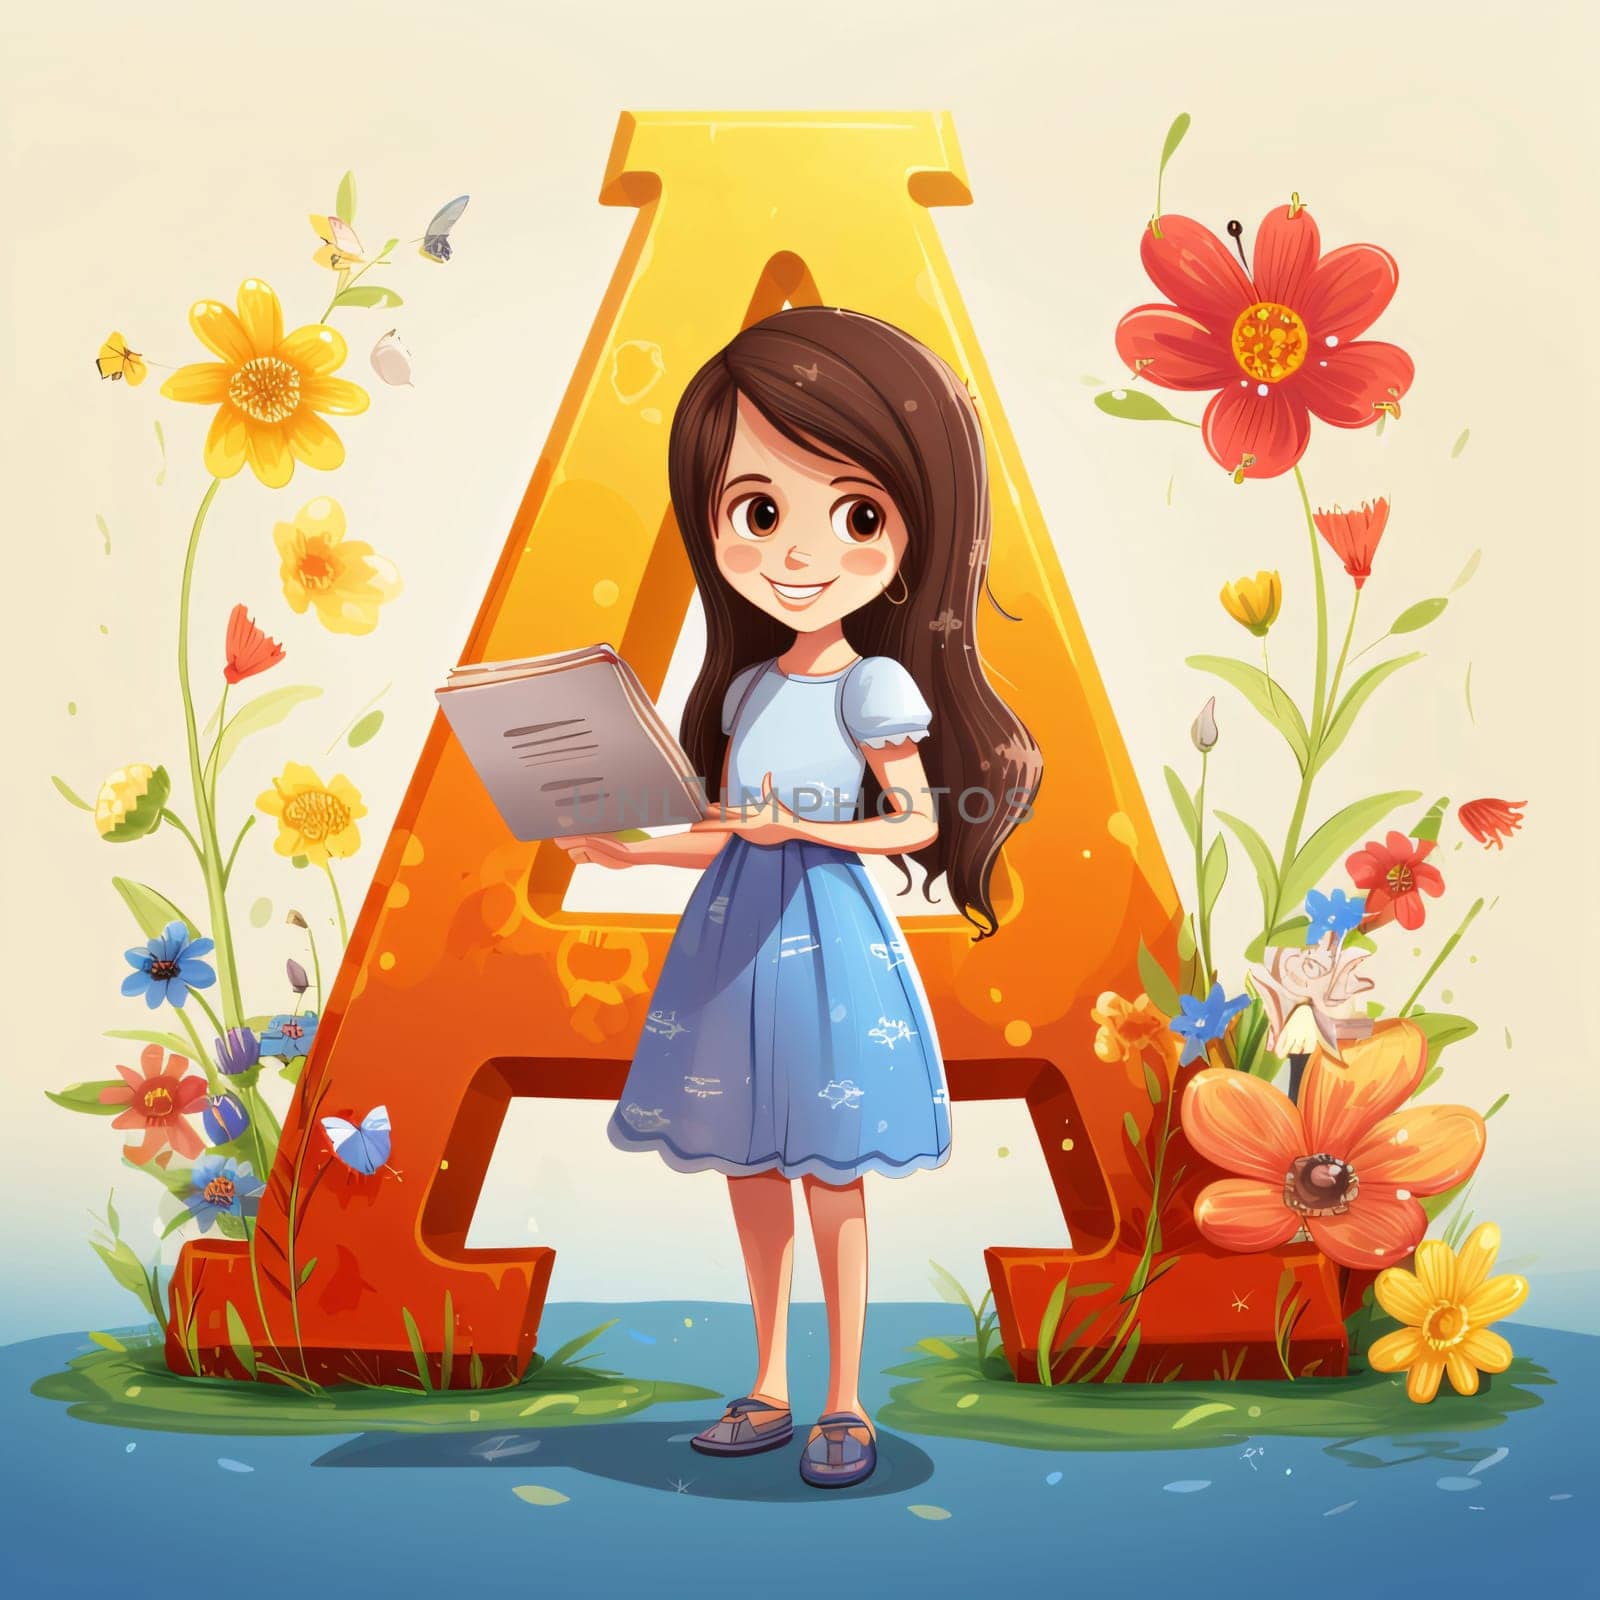 Graphic alphabet letters: Cute little girl with a book in the letter A. Vector illustration.